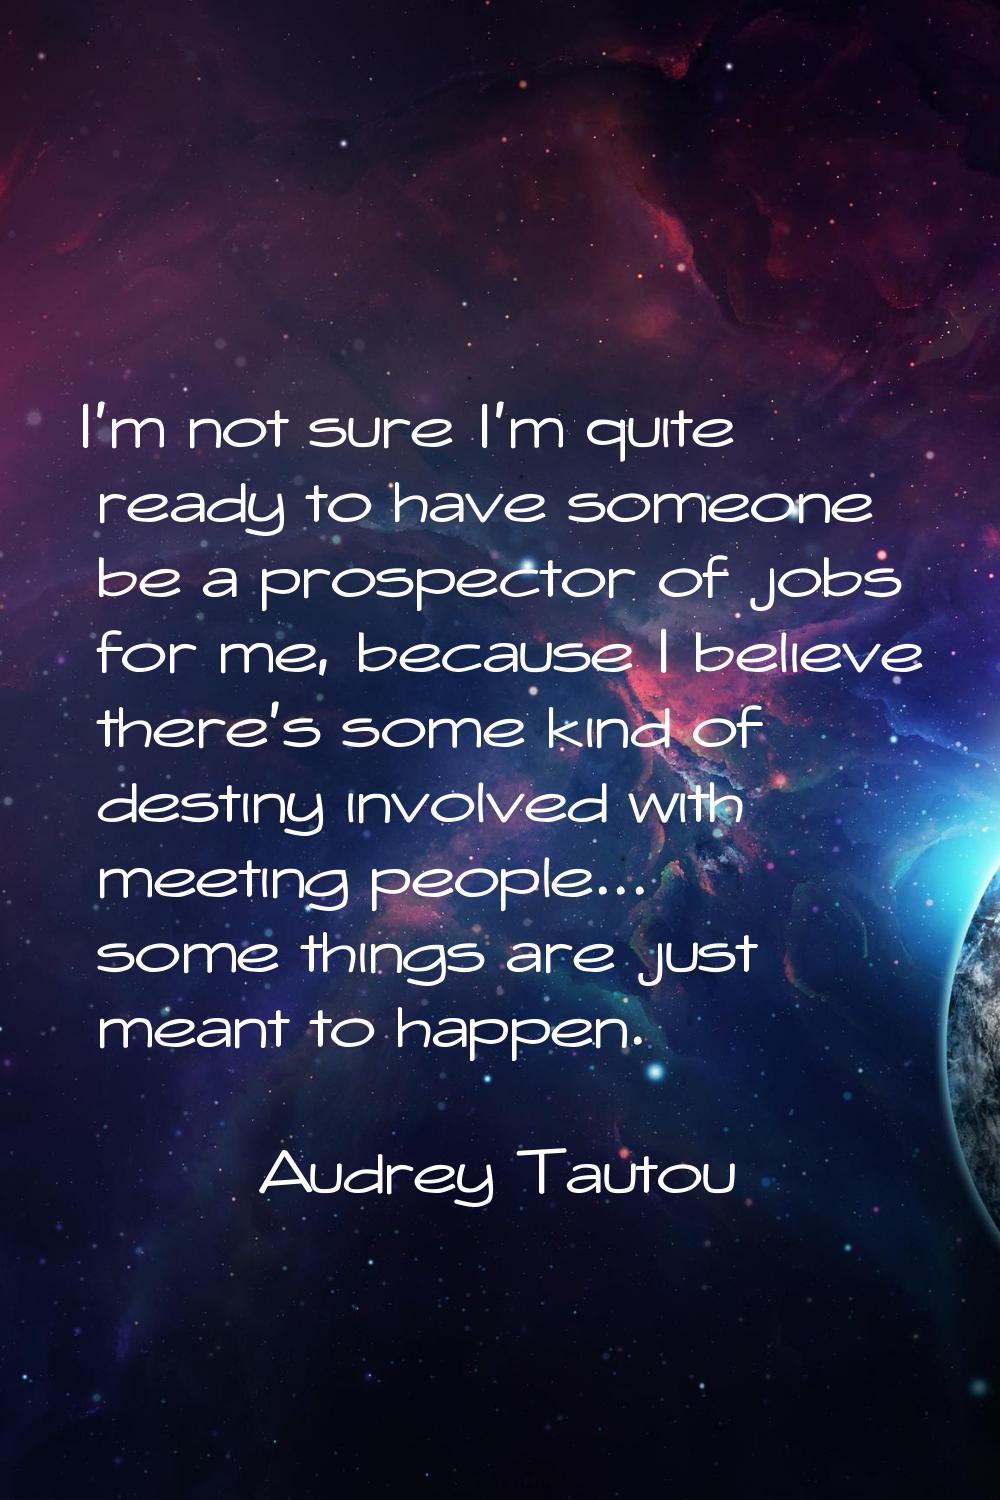 I'm not sure I'm quite ready to have someone be a prospector of jobs for me, because I believe ther